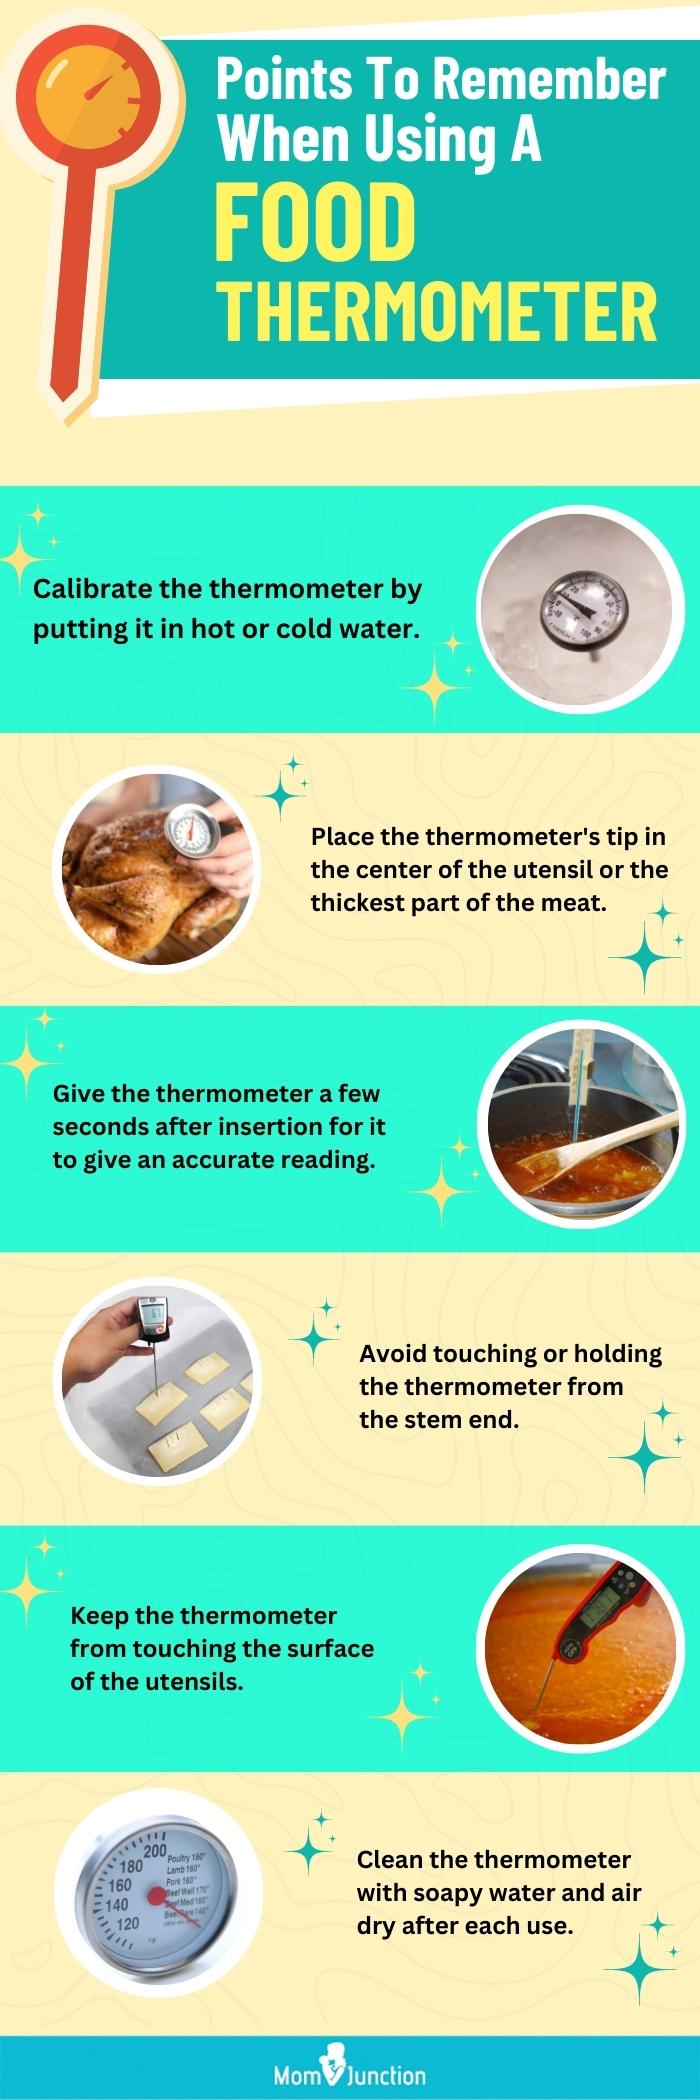 Points To Remember When Using A Food Thermometer (infographic)